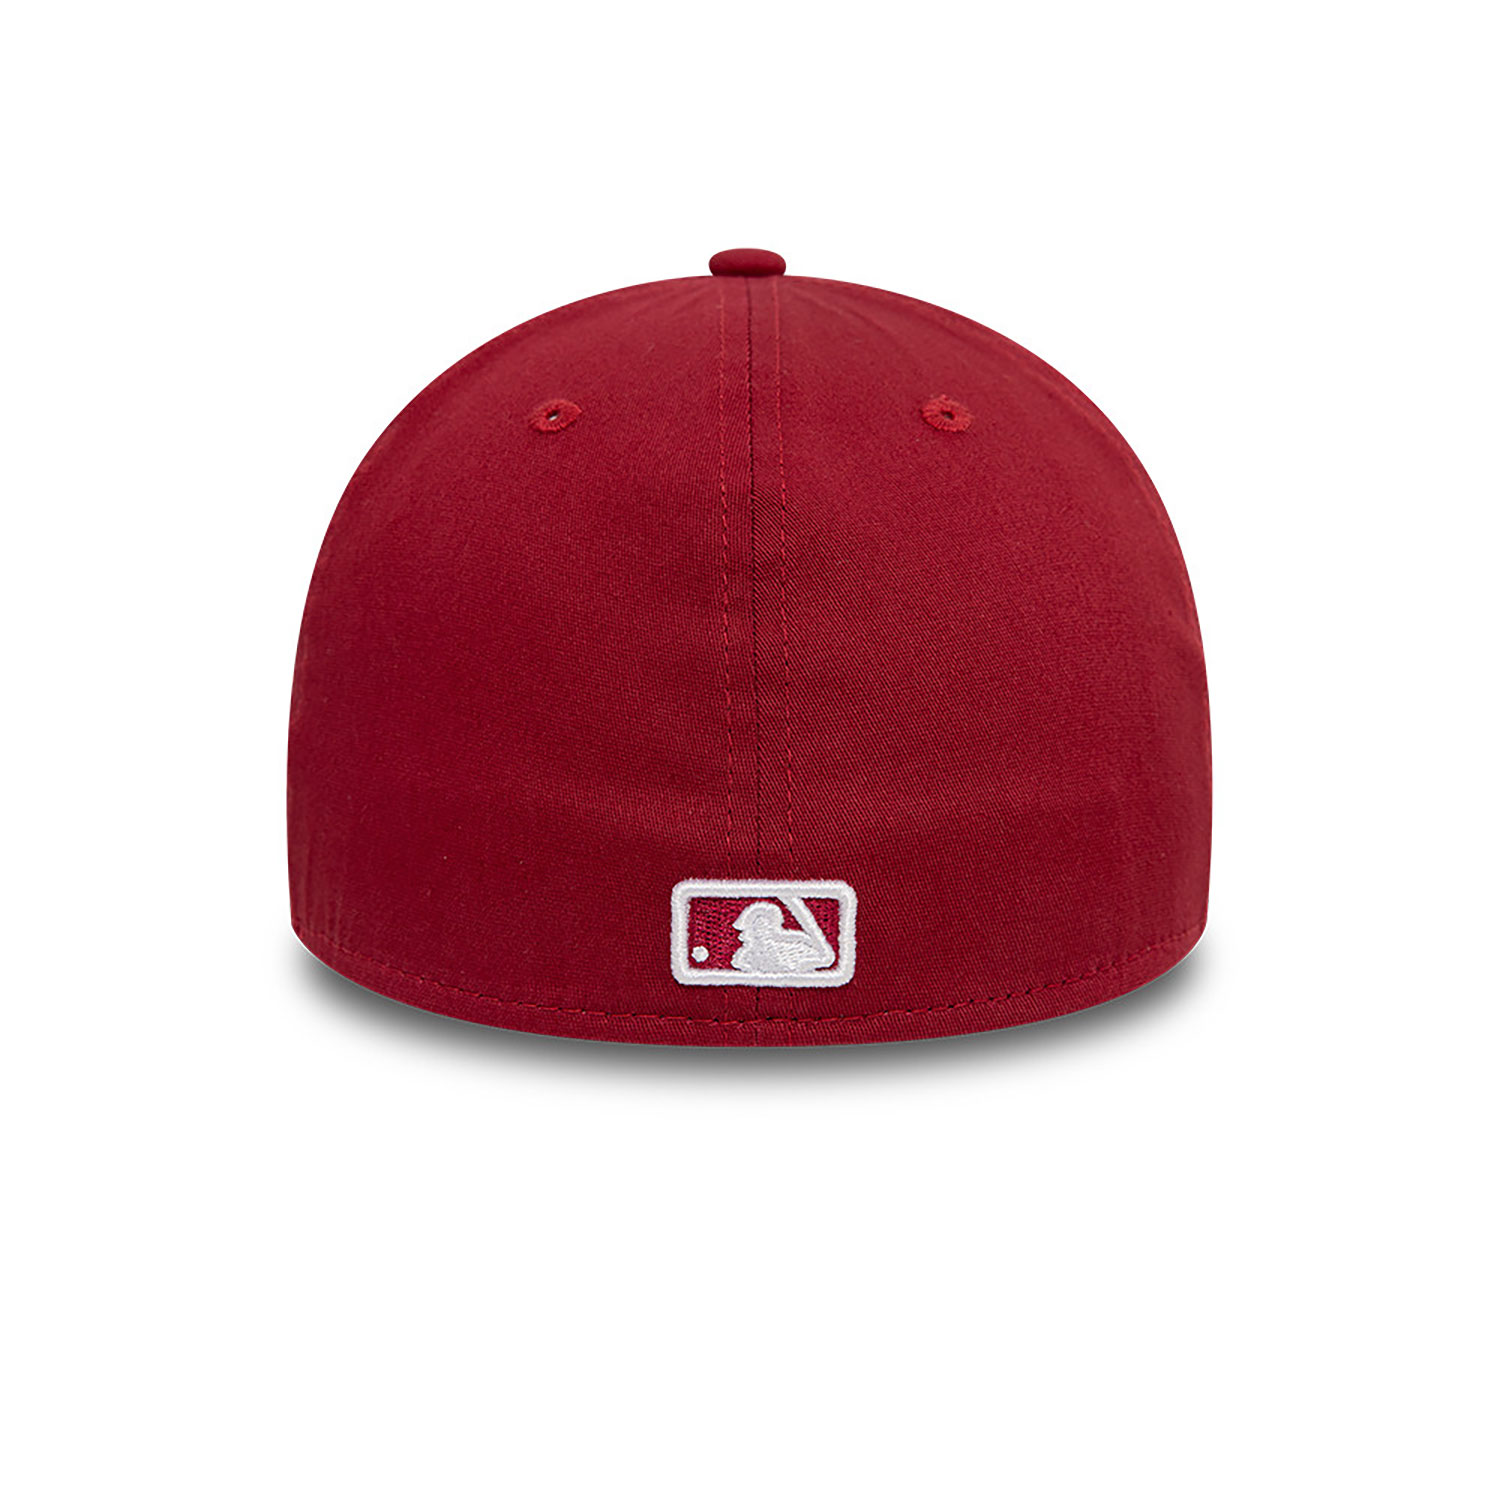 New York Yankees League Essential Dark Red 39THIRTY A-Frame Stretch Fit Cap